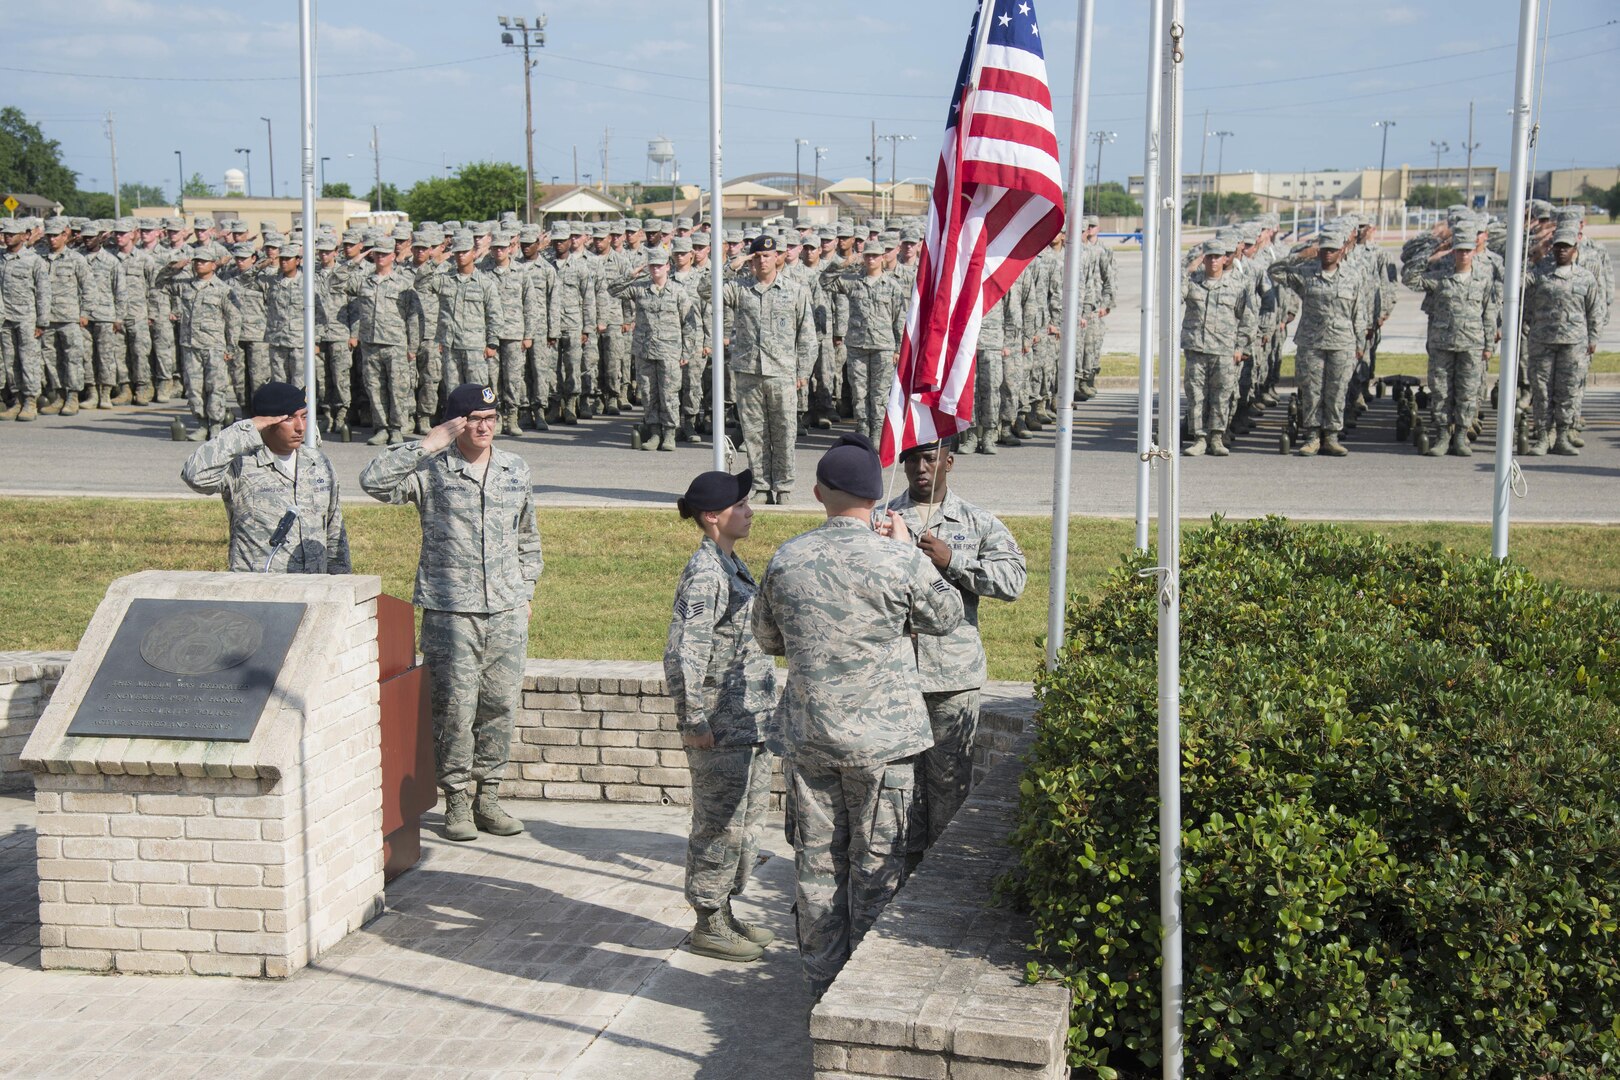 Members of the 343rd Training Squadron lower the flag at the Joint Base San Antonio Police Week retreat ceremony held in honor of fallen officers May 15, 2017, outside the Security Forces Museum at JBSA-Lackland. JBSA security forces members and military police officers joined local police departments to honor their comrades who were killed in action. (U.S. Air Force photo by Airman Dillon Parker)